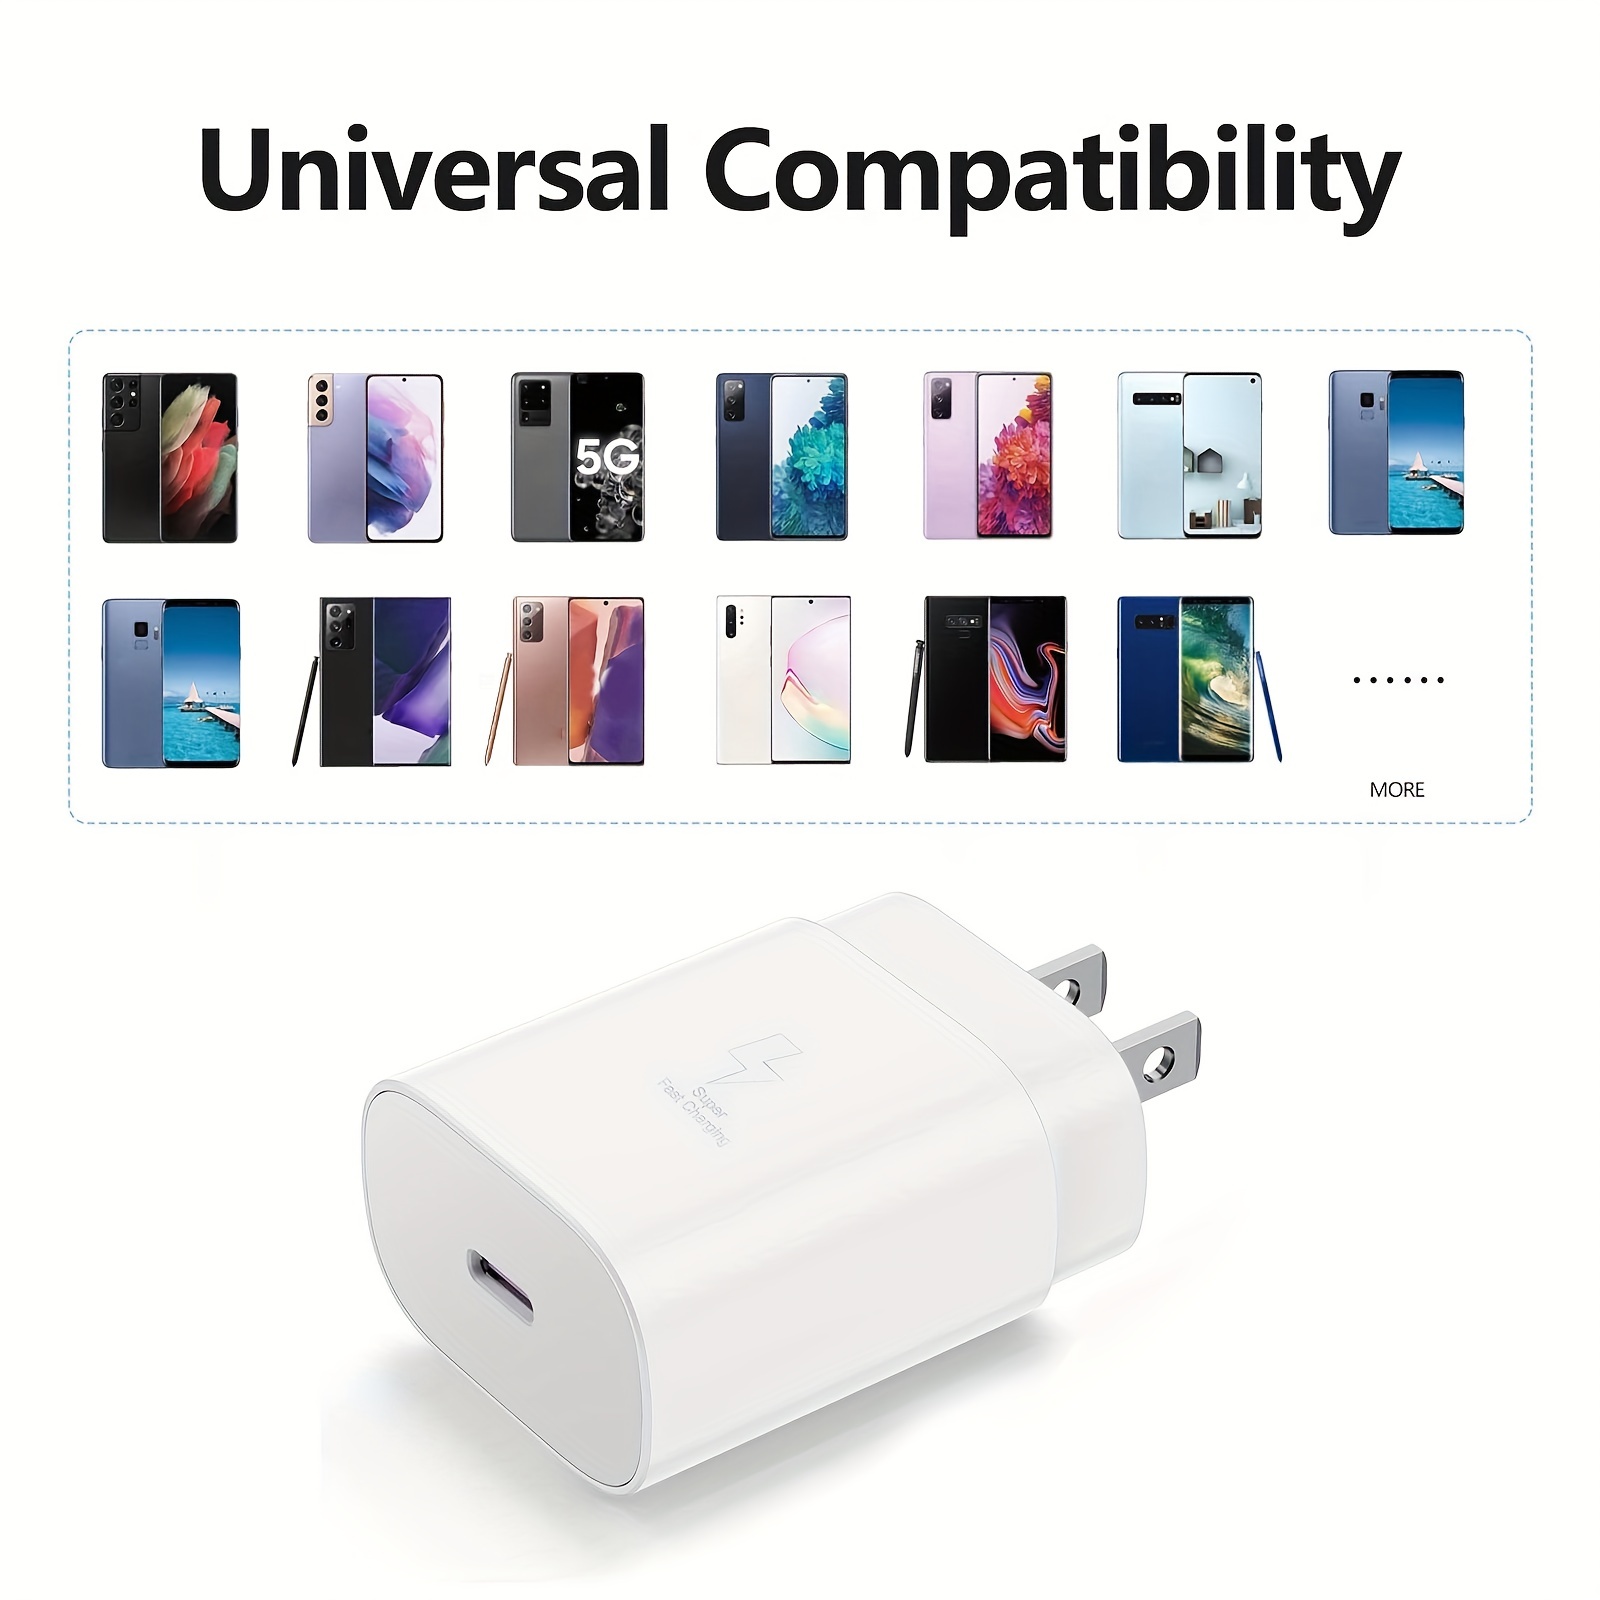 usb c charger super fast charging type c android phone charger with cable cord for samsung galaxy s23 ultra s23 s23 s22 s22 ultra s22 note 10 20 s20 s21 galaxy tab s7 s8 details 5